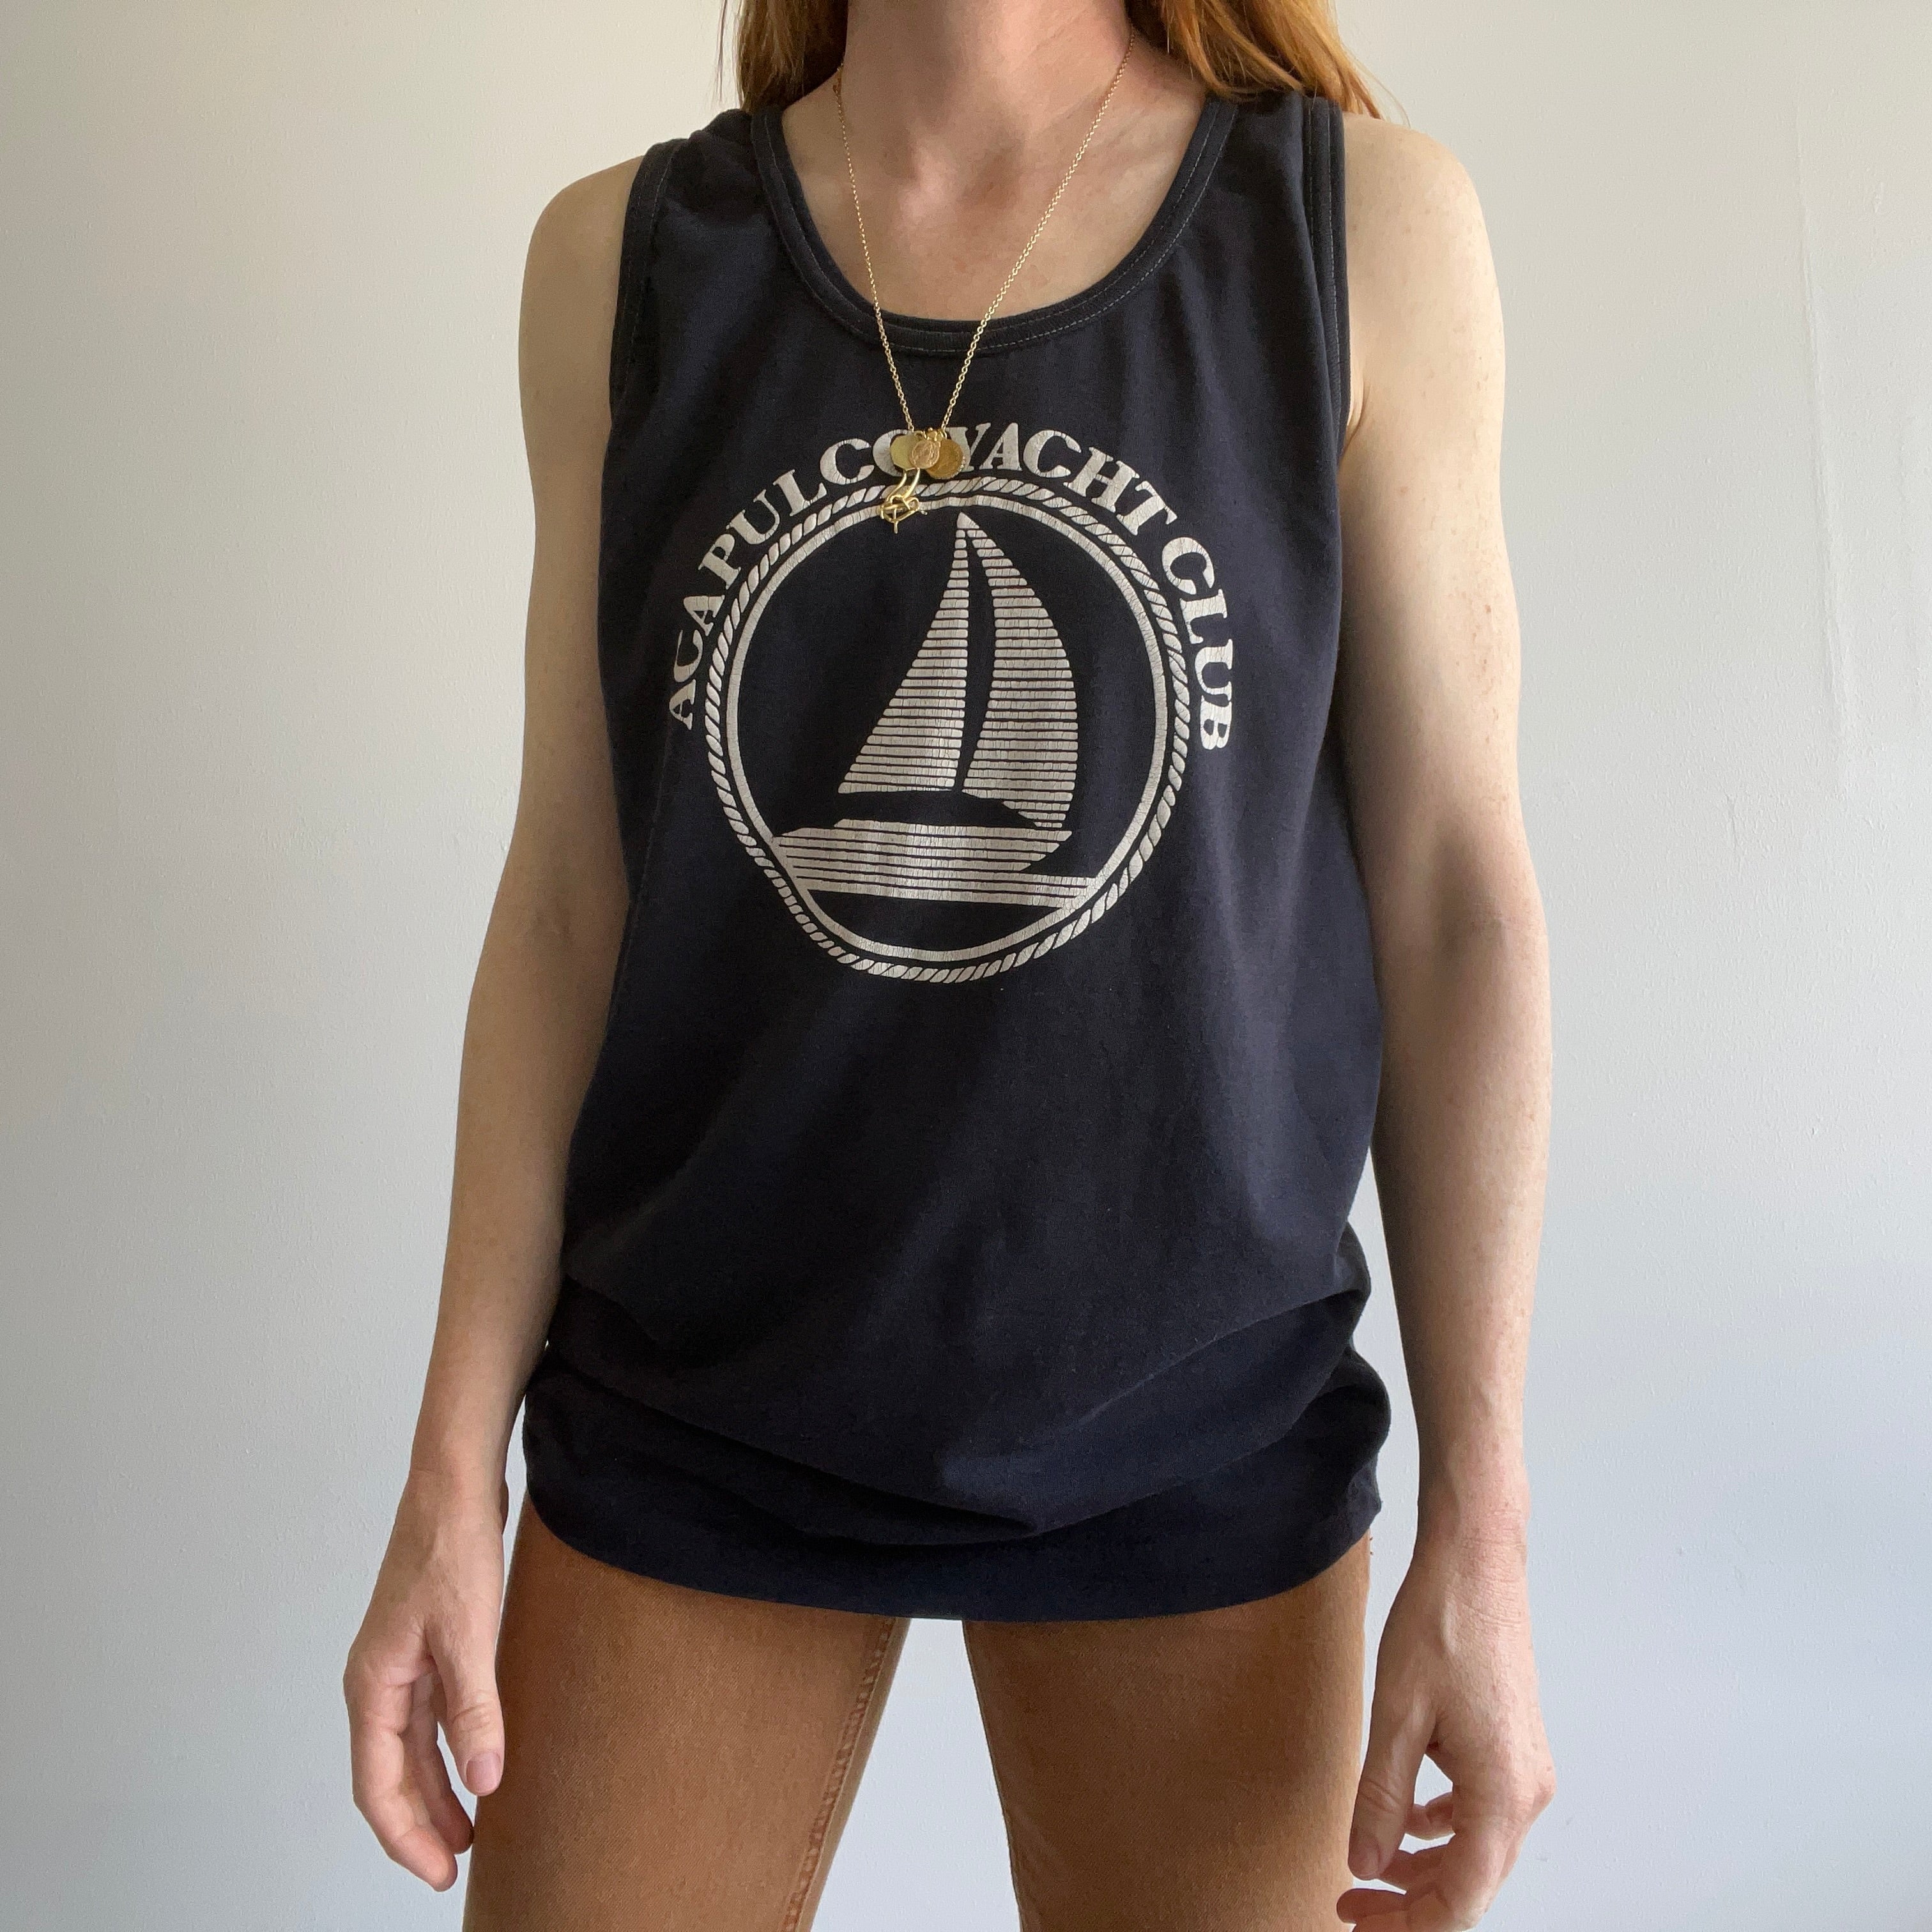 1980s Acapulco Yacht Club Tank Top - YES!